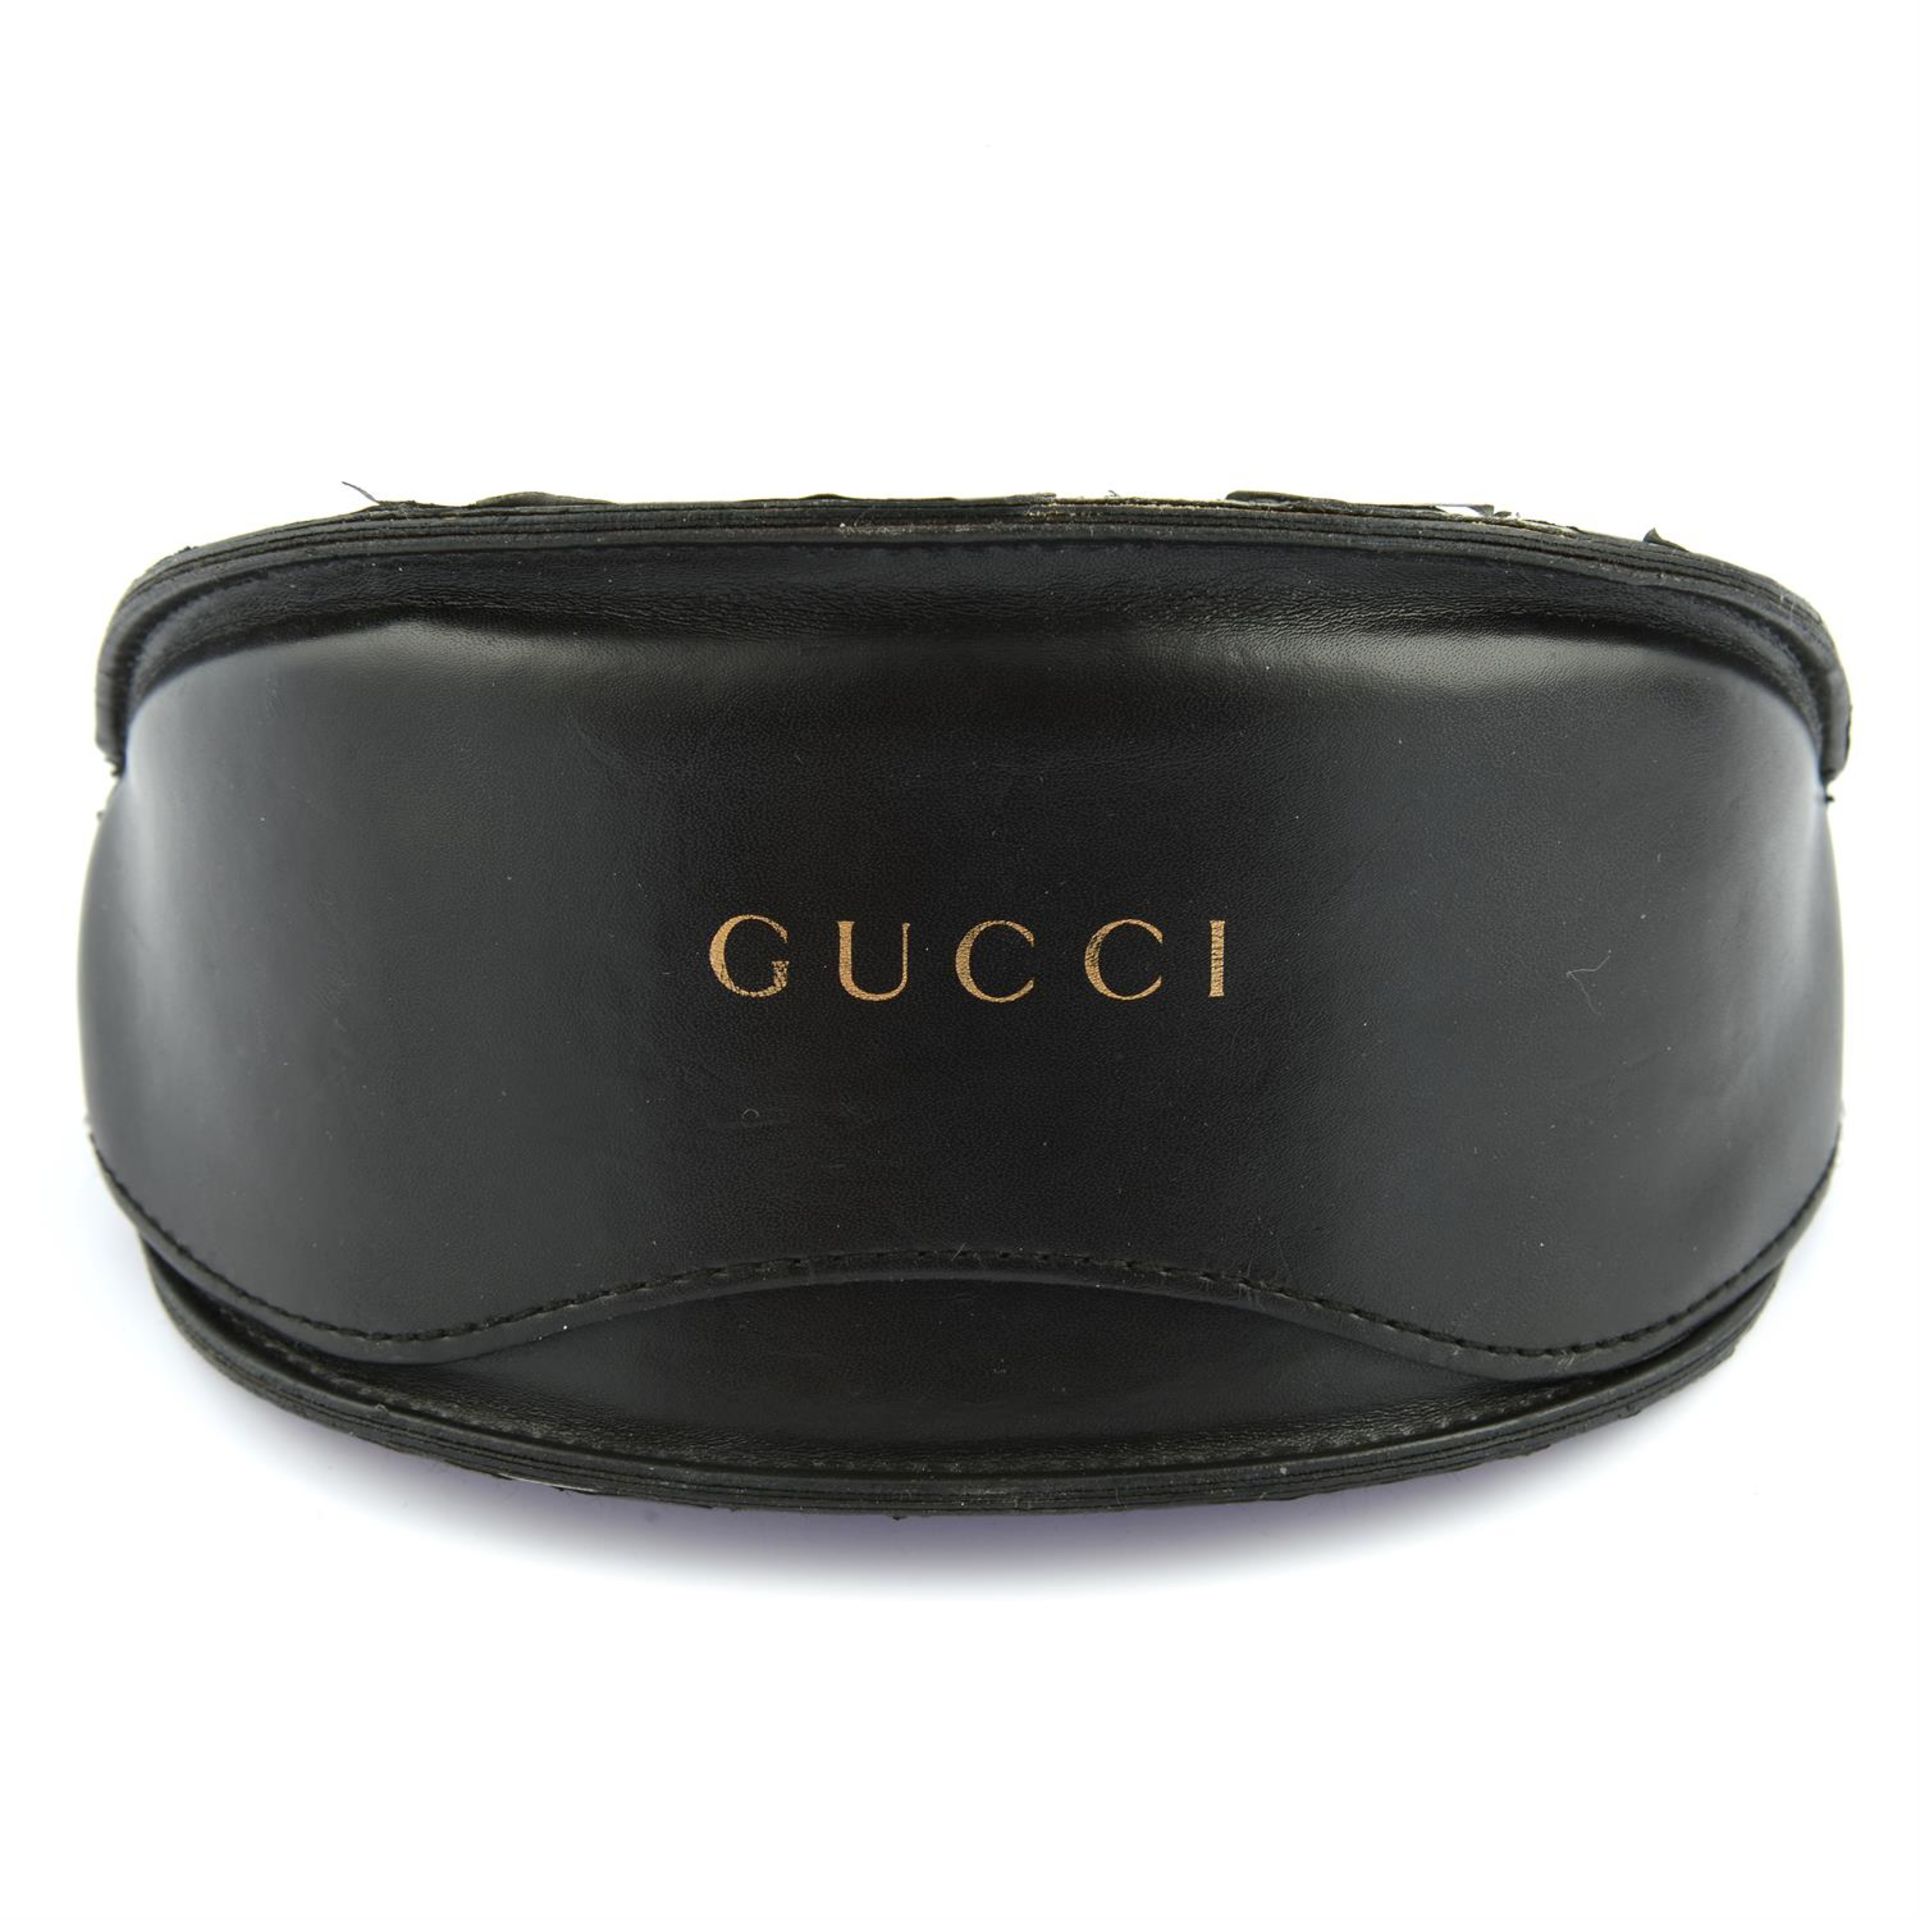 GUCCI - a pair of sunglasses. - Image 3 of 3